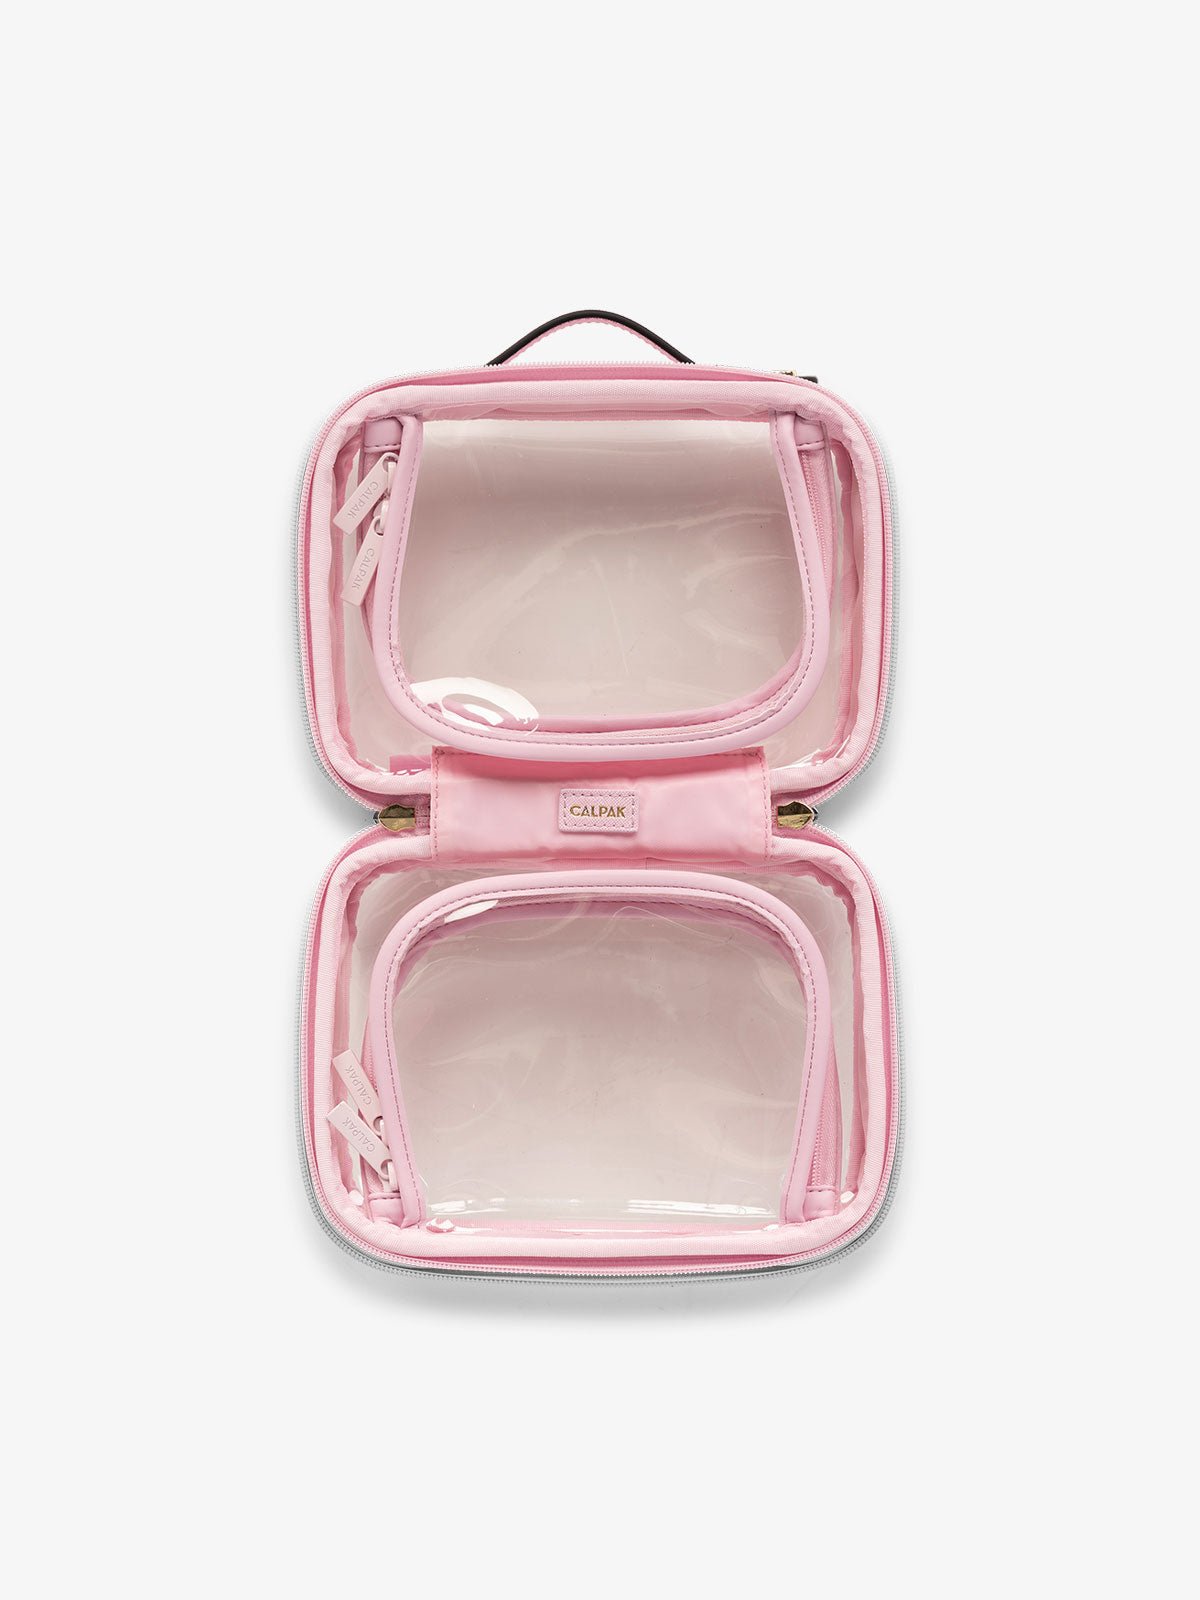 CALPAK small clear skincare bag with multiple zippered compartments in strawberry pink